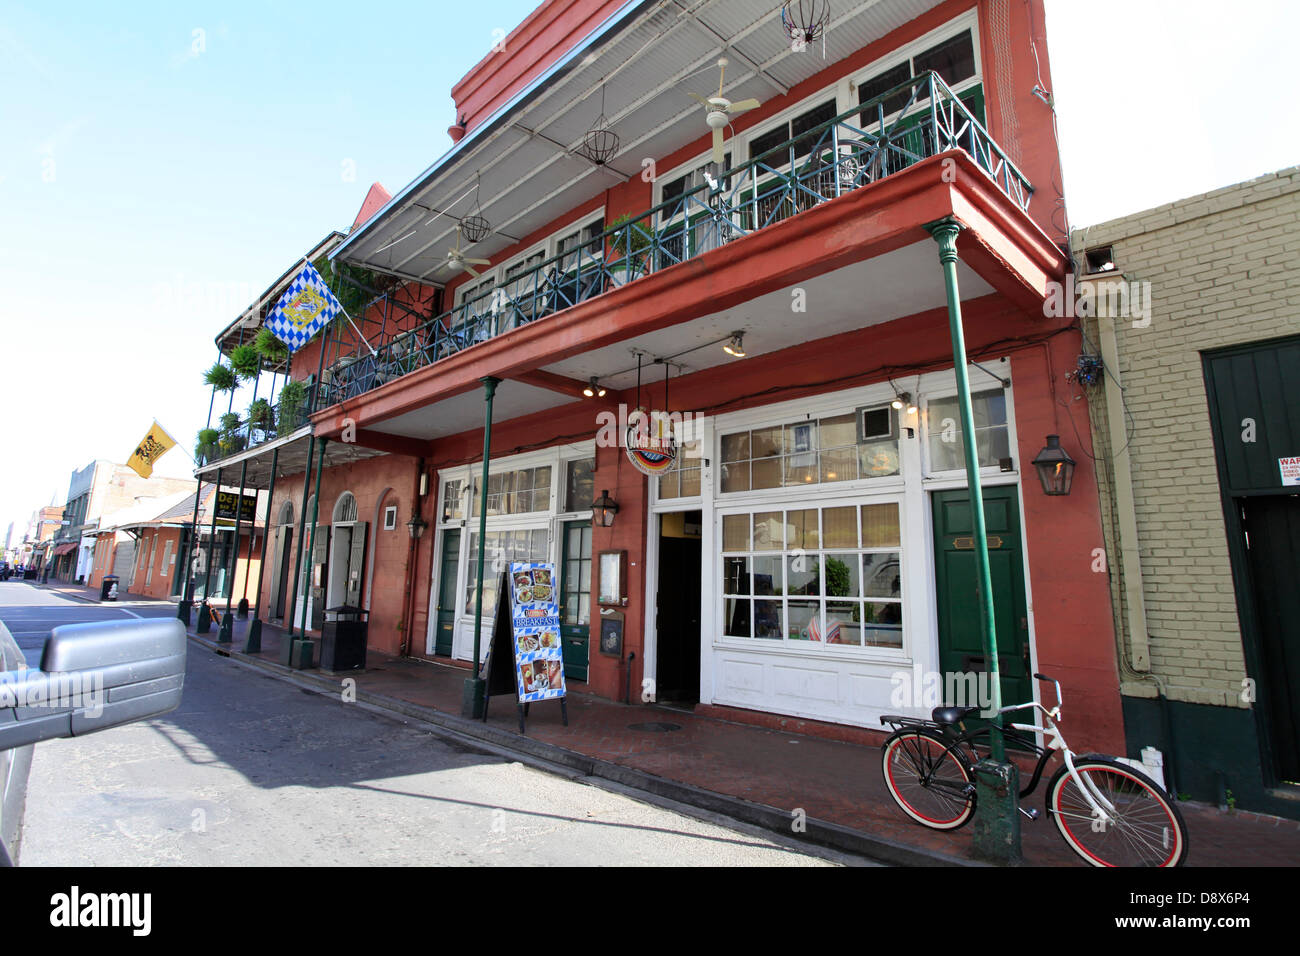 German Restaurant Jagerhaus in Conti St in  French Quarter of New Orleans. Typically for the French Quarter are the historic buildings, that have the roots from the French colonization.  Photo: Klaus Nowottnick Date: April 22, 2013 Stock Photo